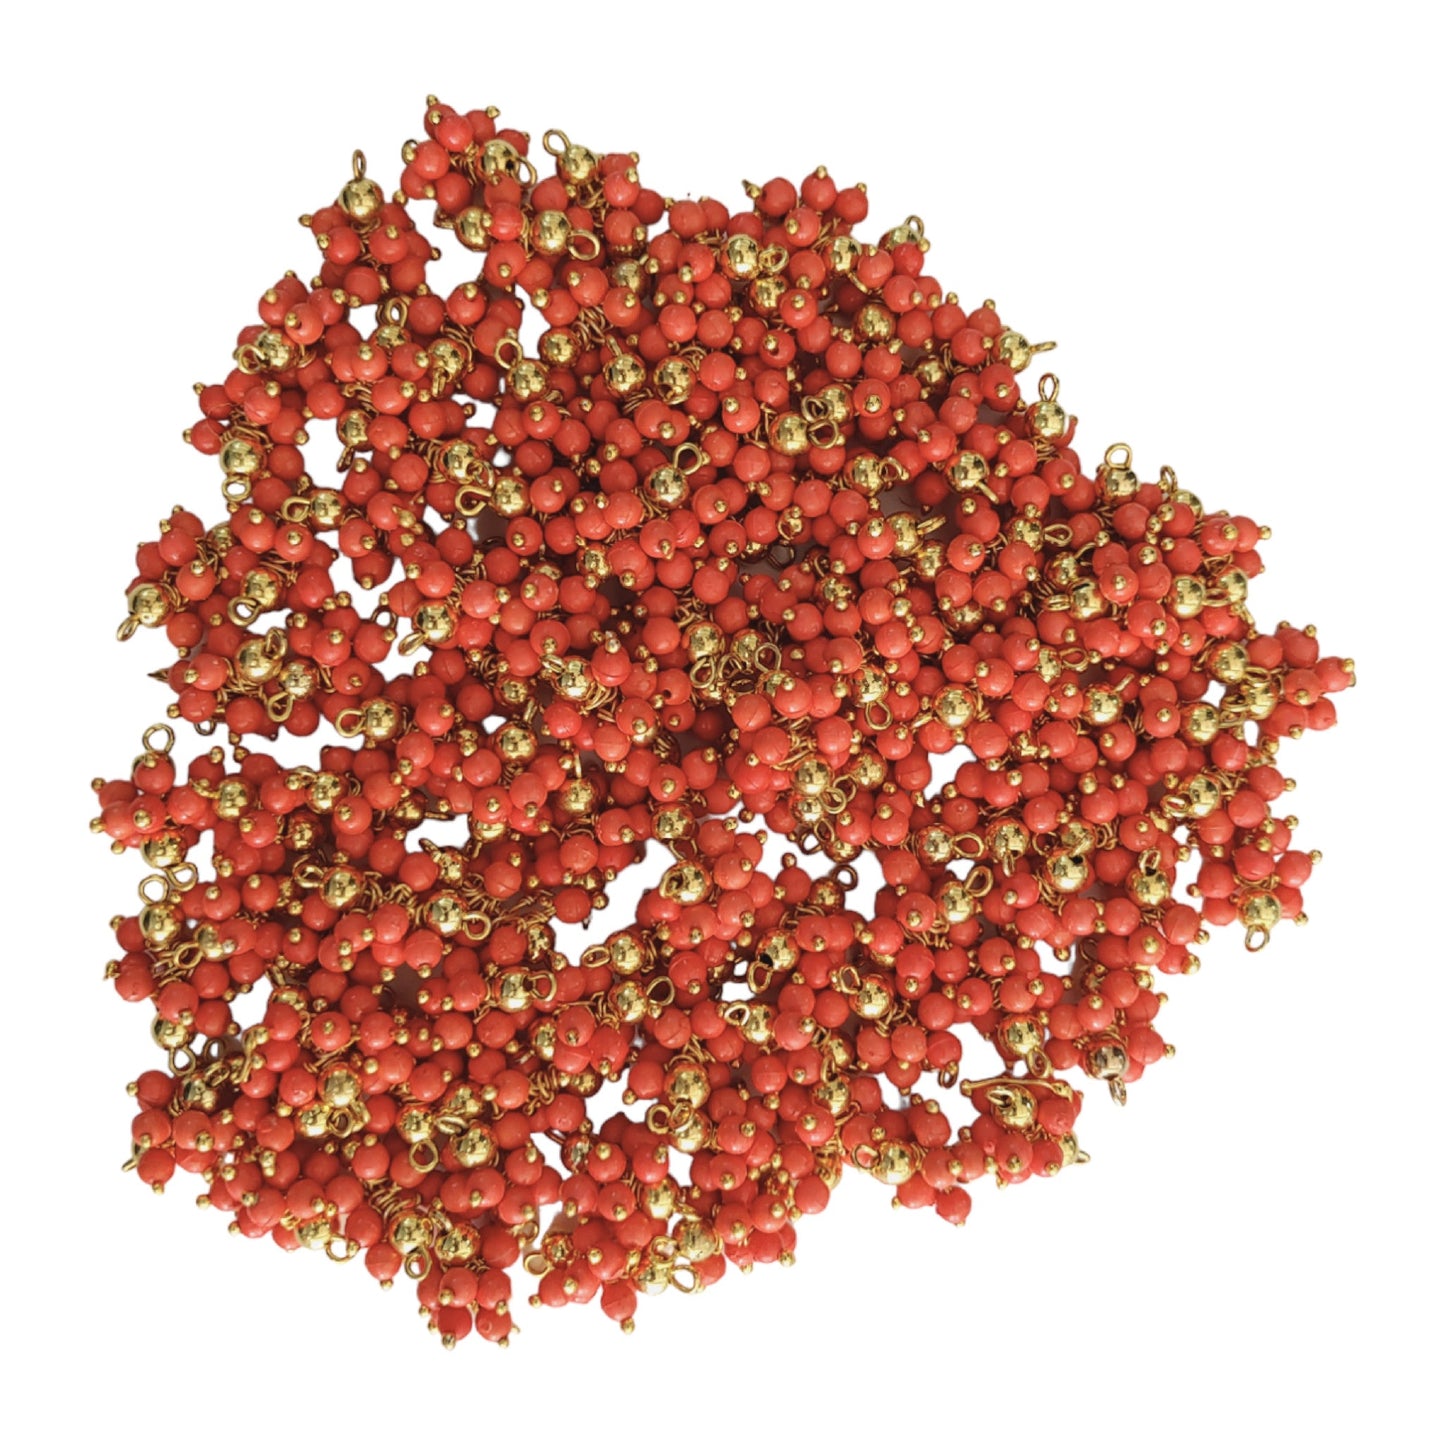 Indian Petals - Lorean Beads Motif with Hook Ideal for Jewelry designing, Craft Making or Decor Lorean Beads Motif with Hook Ideal for Jewelry designing, Craft Making or Decor - Coral / 50 Pieces